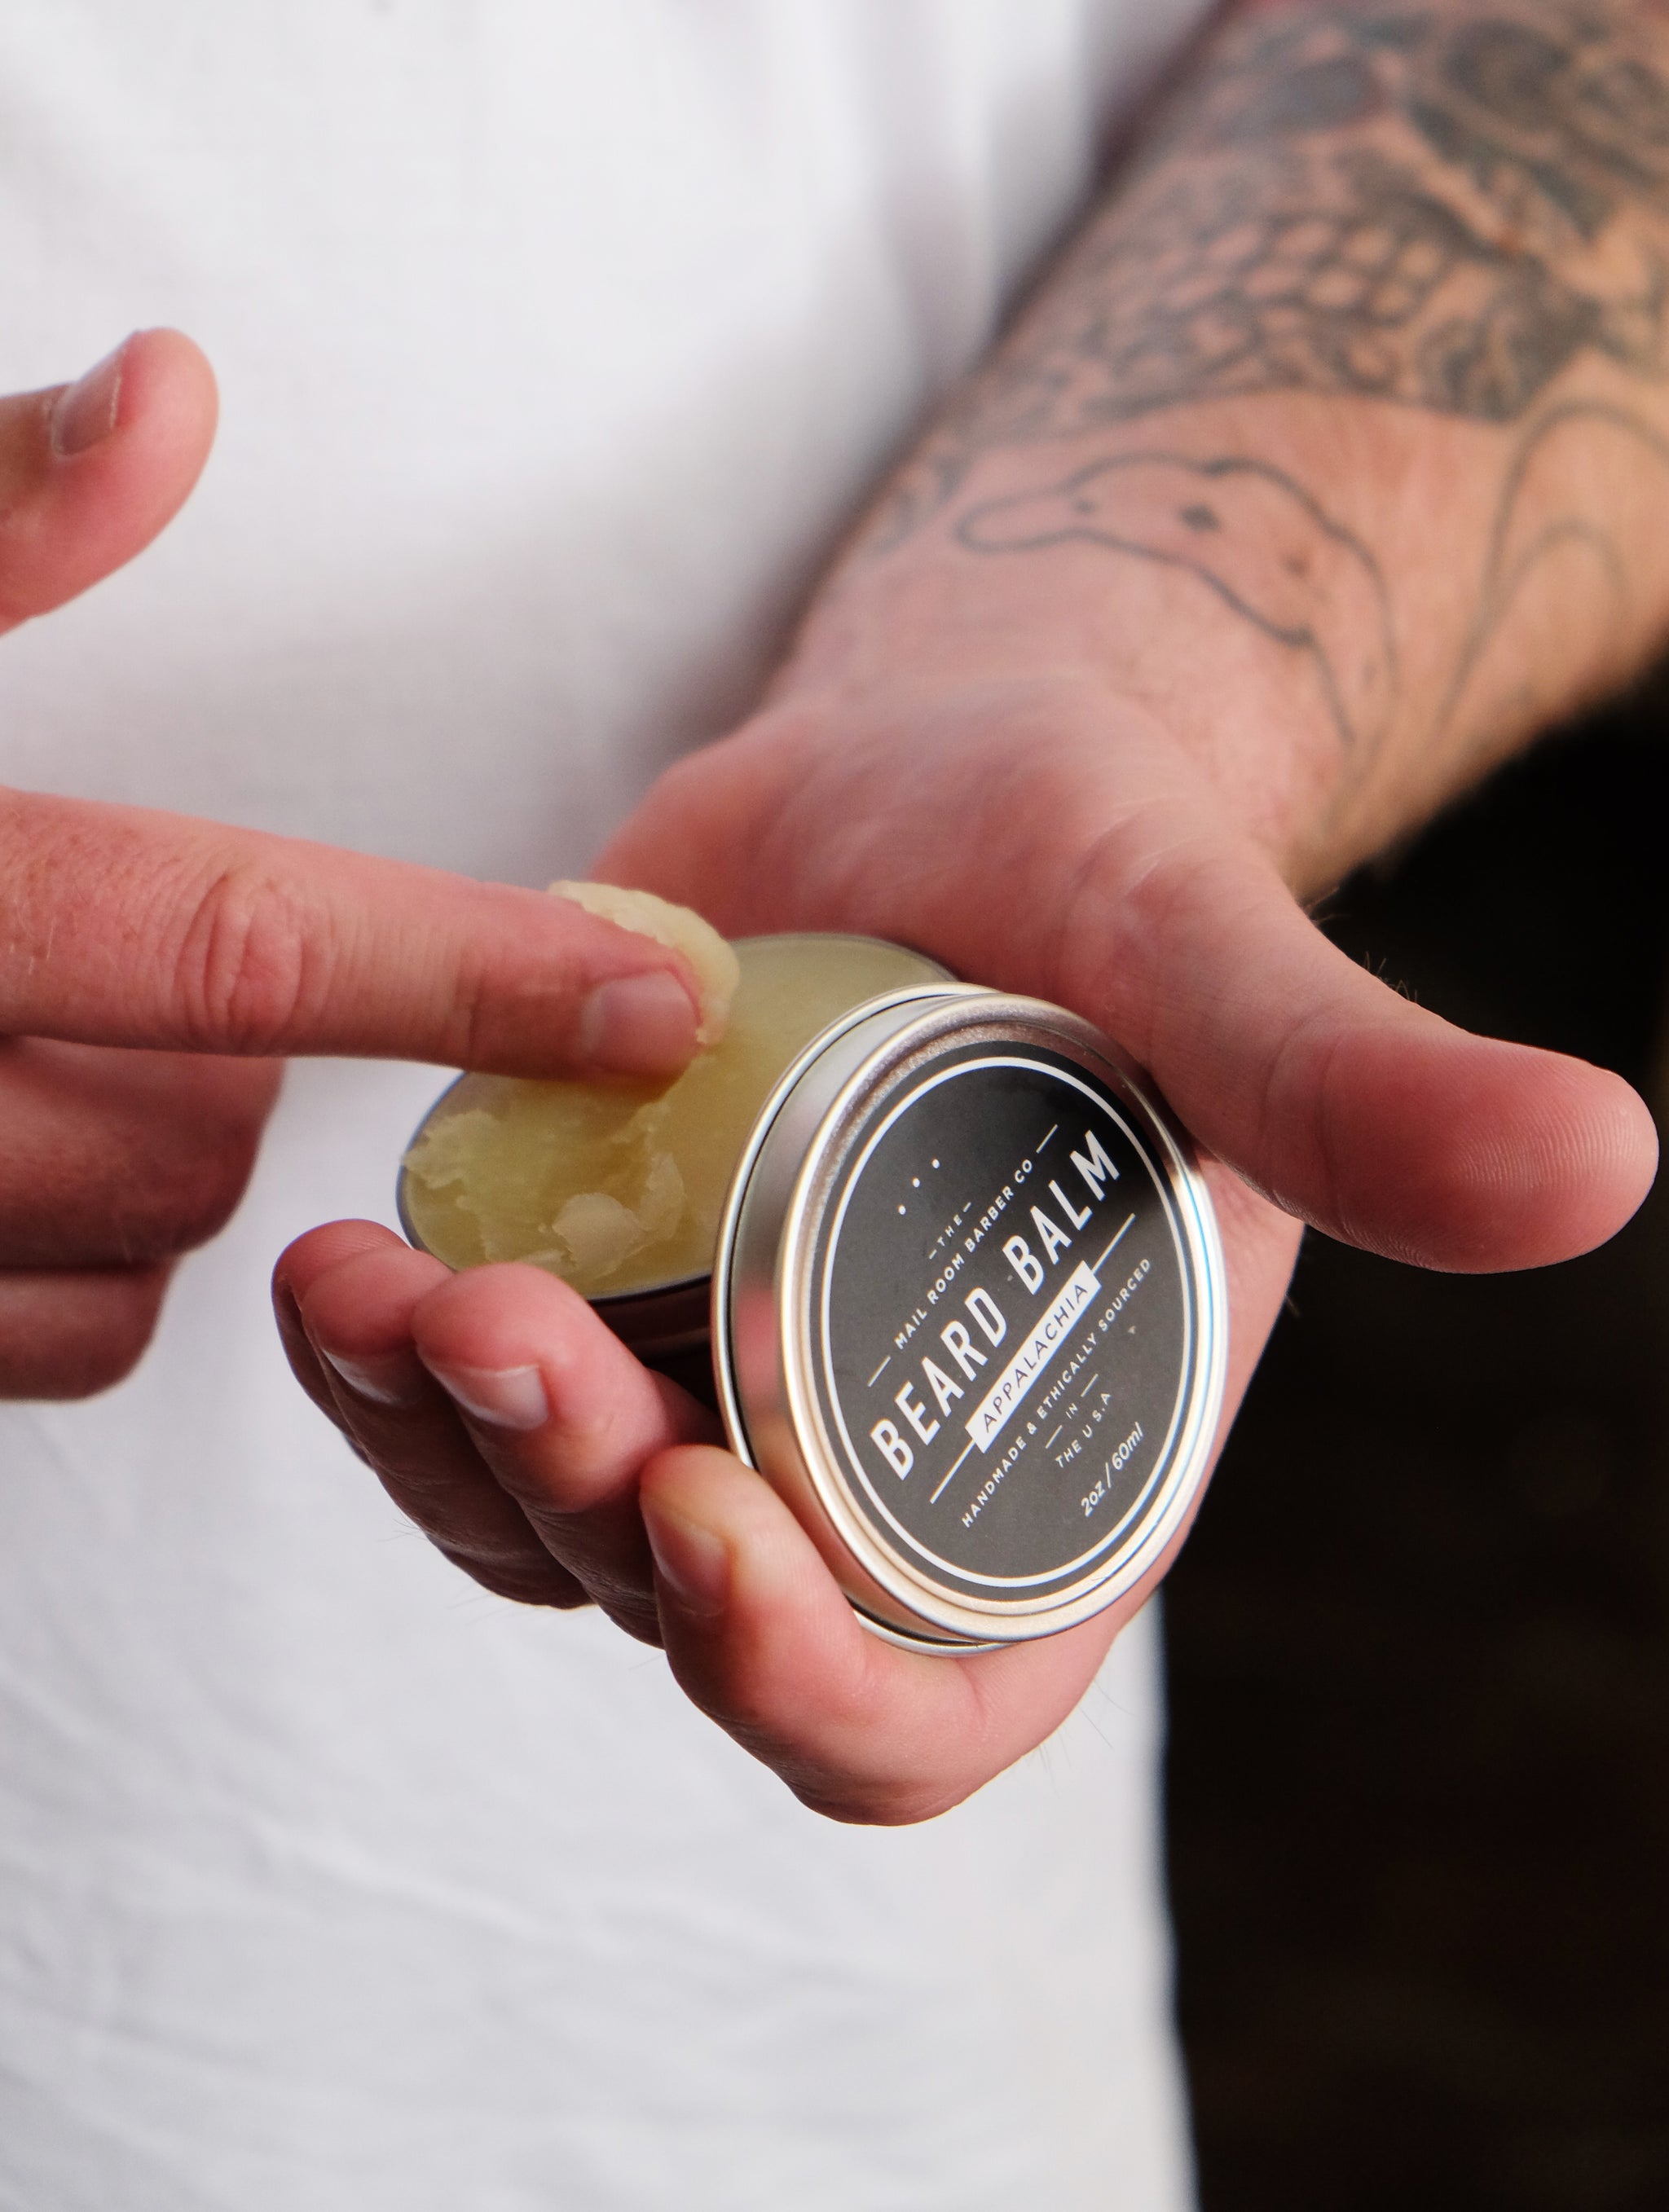 How to Use Beard Balm in Under a minute